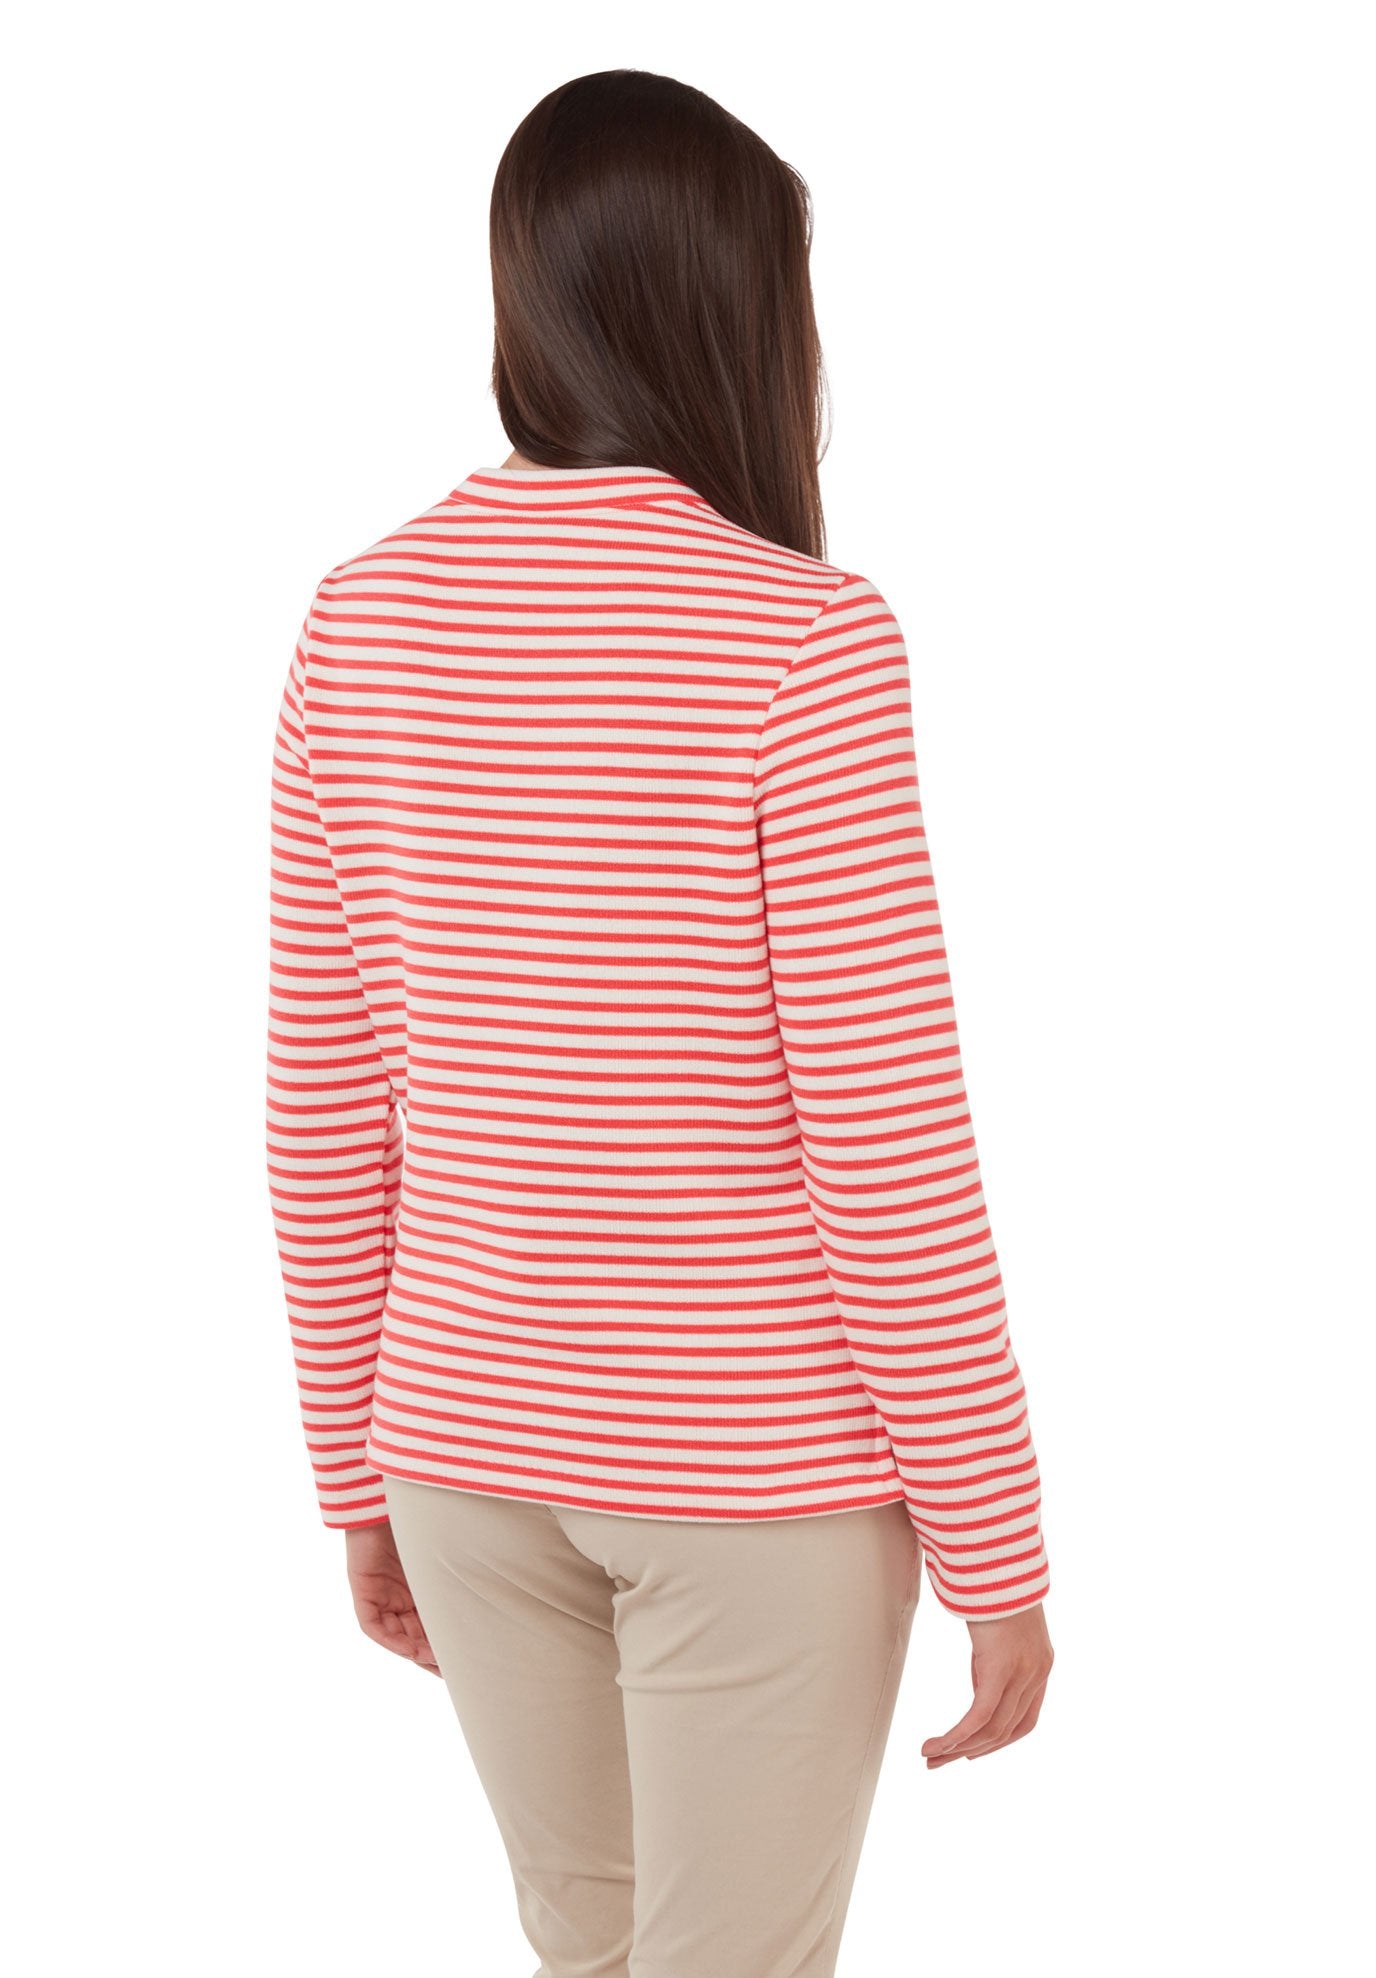 Balmoral BretonBack View Red Stripe Top by Craghoppers 